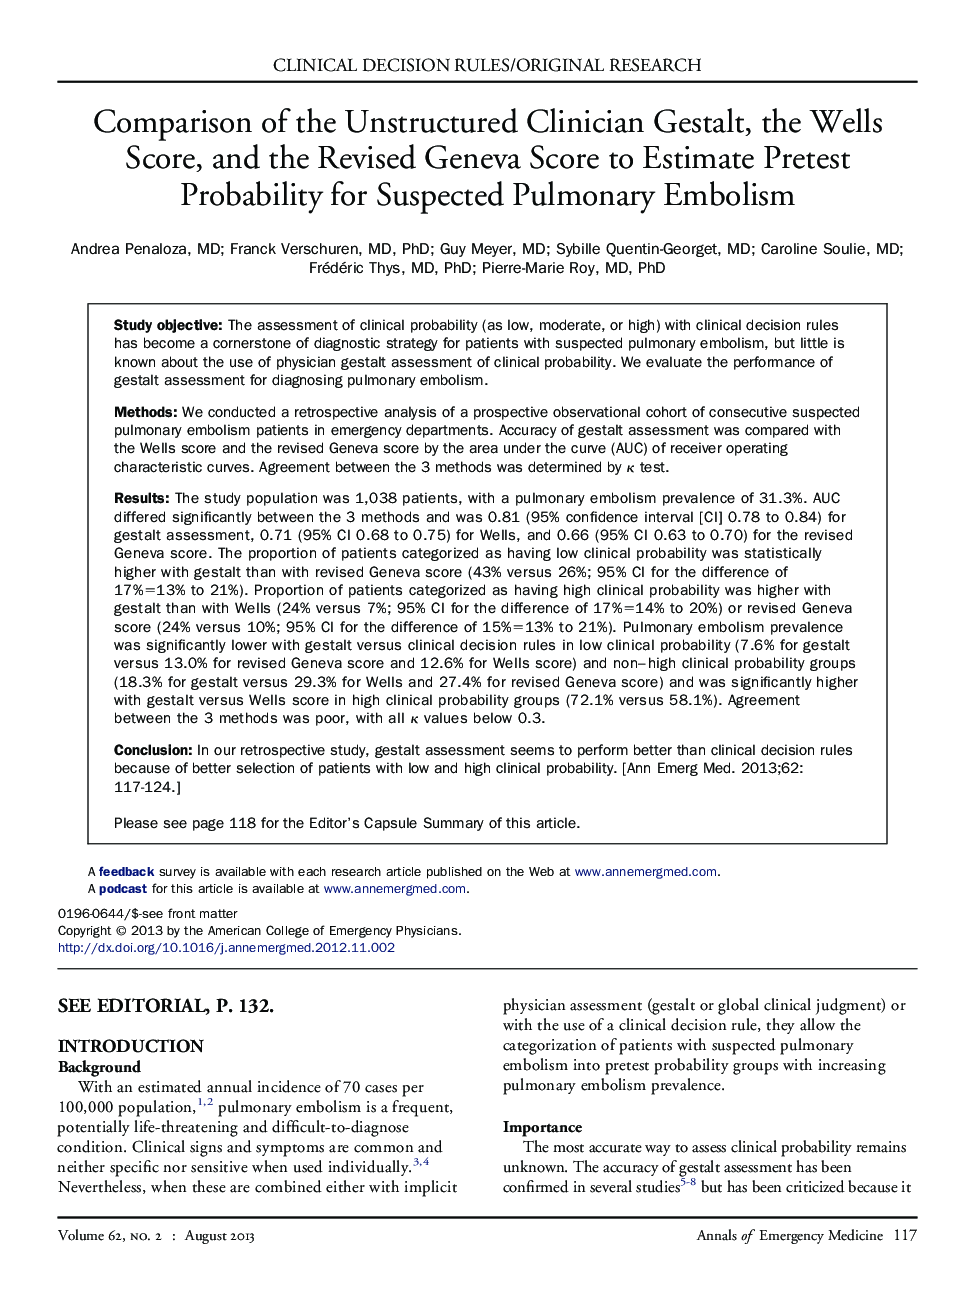 Comparison of the Unstructured Clinician Gestalt, the Wells Score, and the Revised Geneva Score to Estimate Pretest Probability for Suspected Pulmonary Embolism